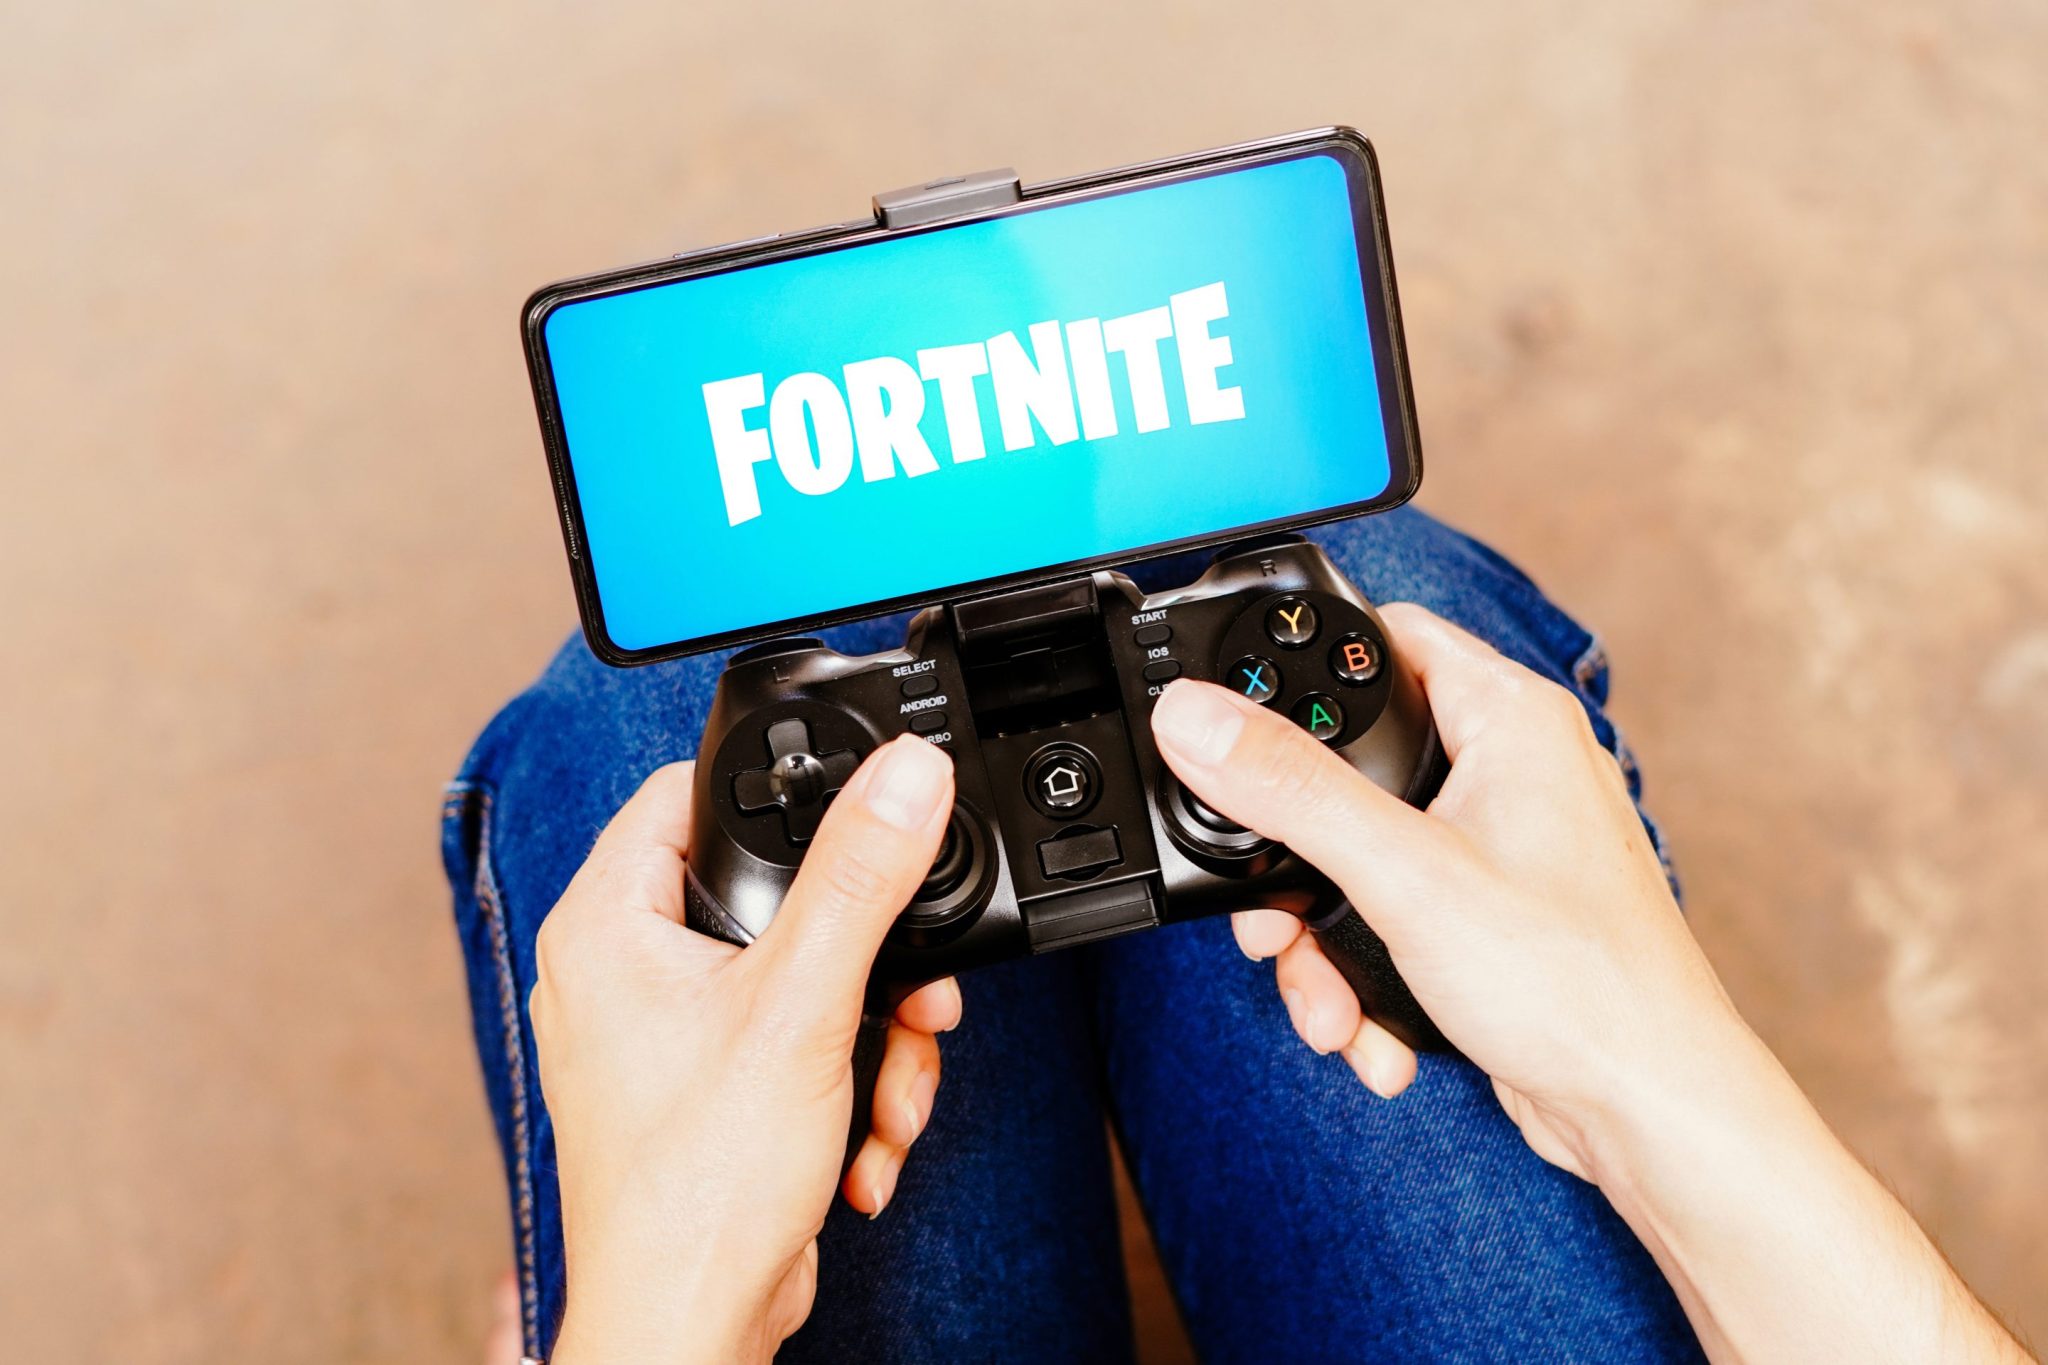 Parents whose kids bought Fortnite gear without asking can get a refund